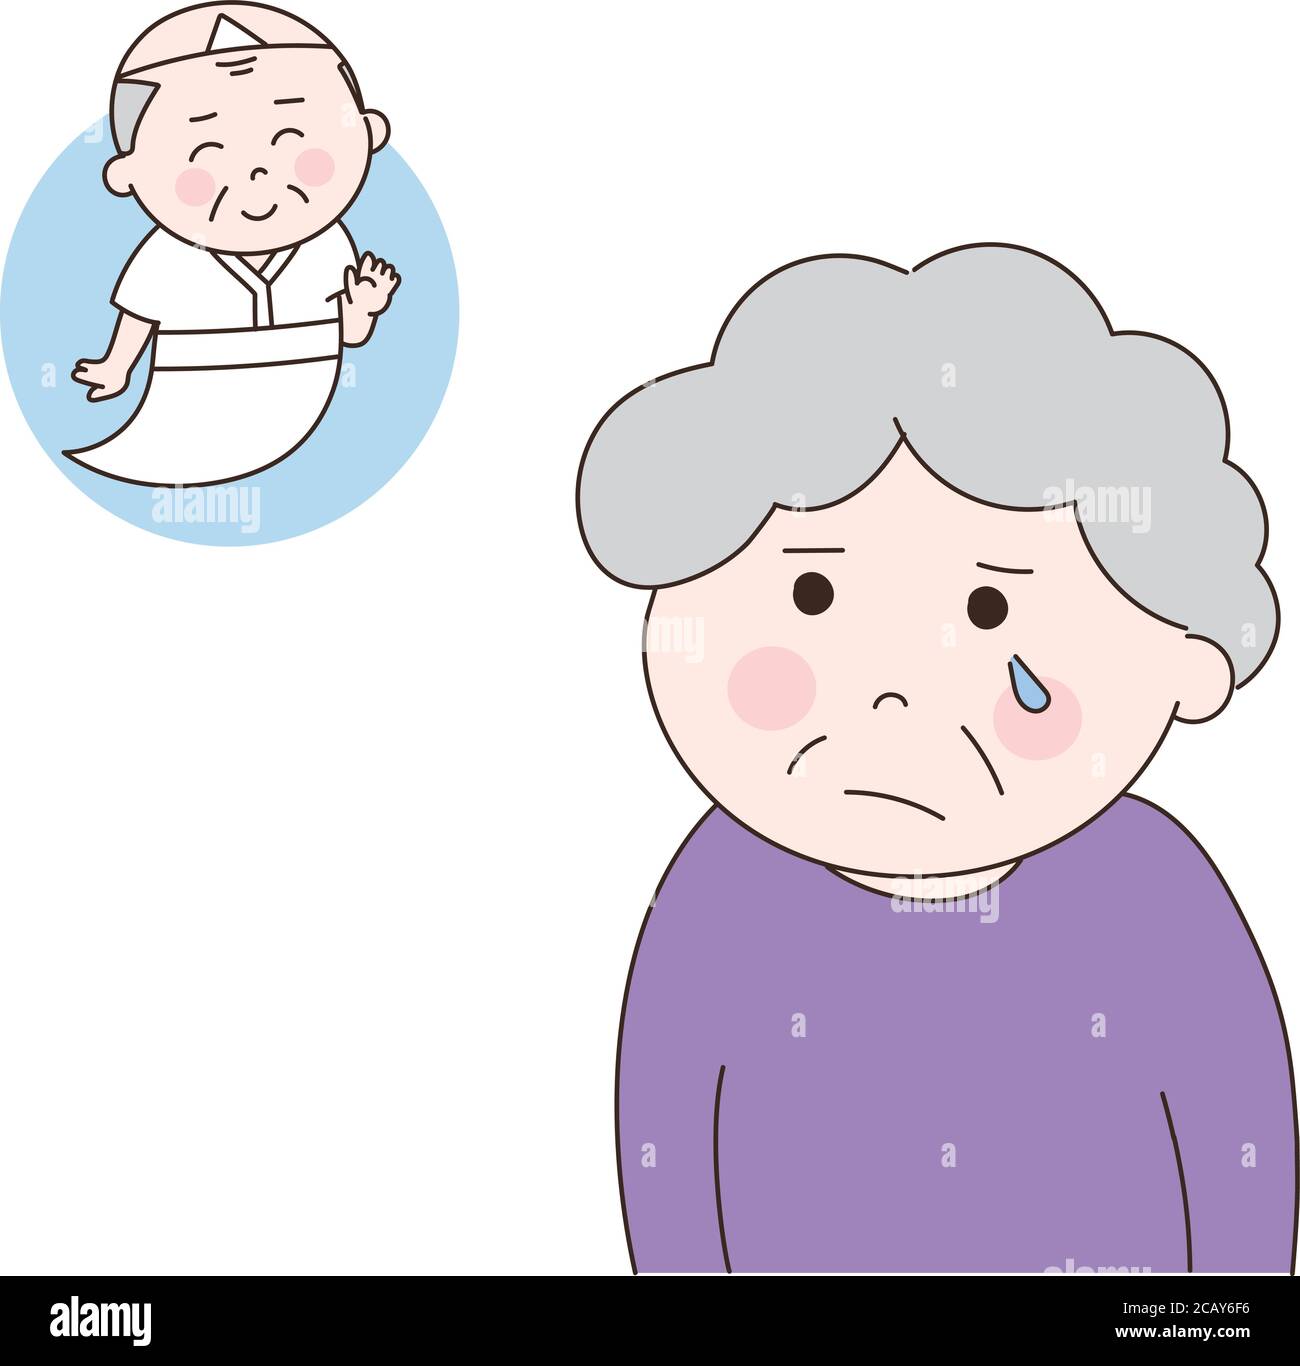 Elderly woman reminiscing about her late husband. Vector illustration isolated on white background. Stock Vector